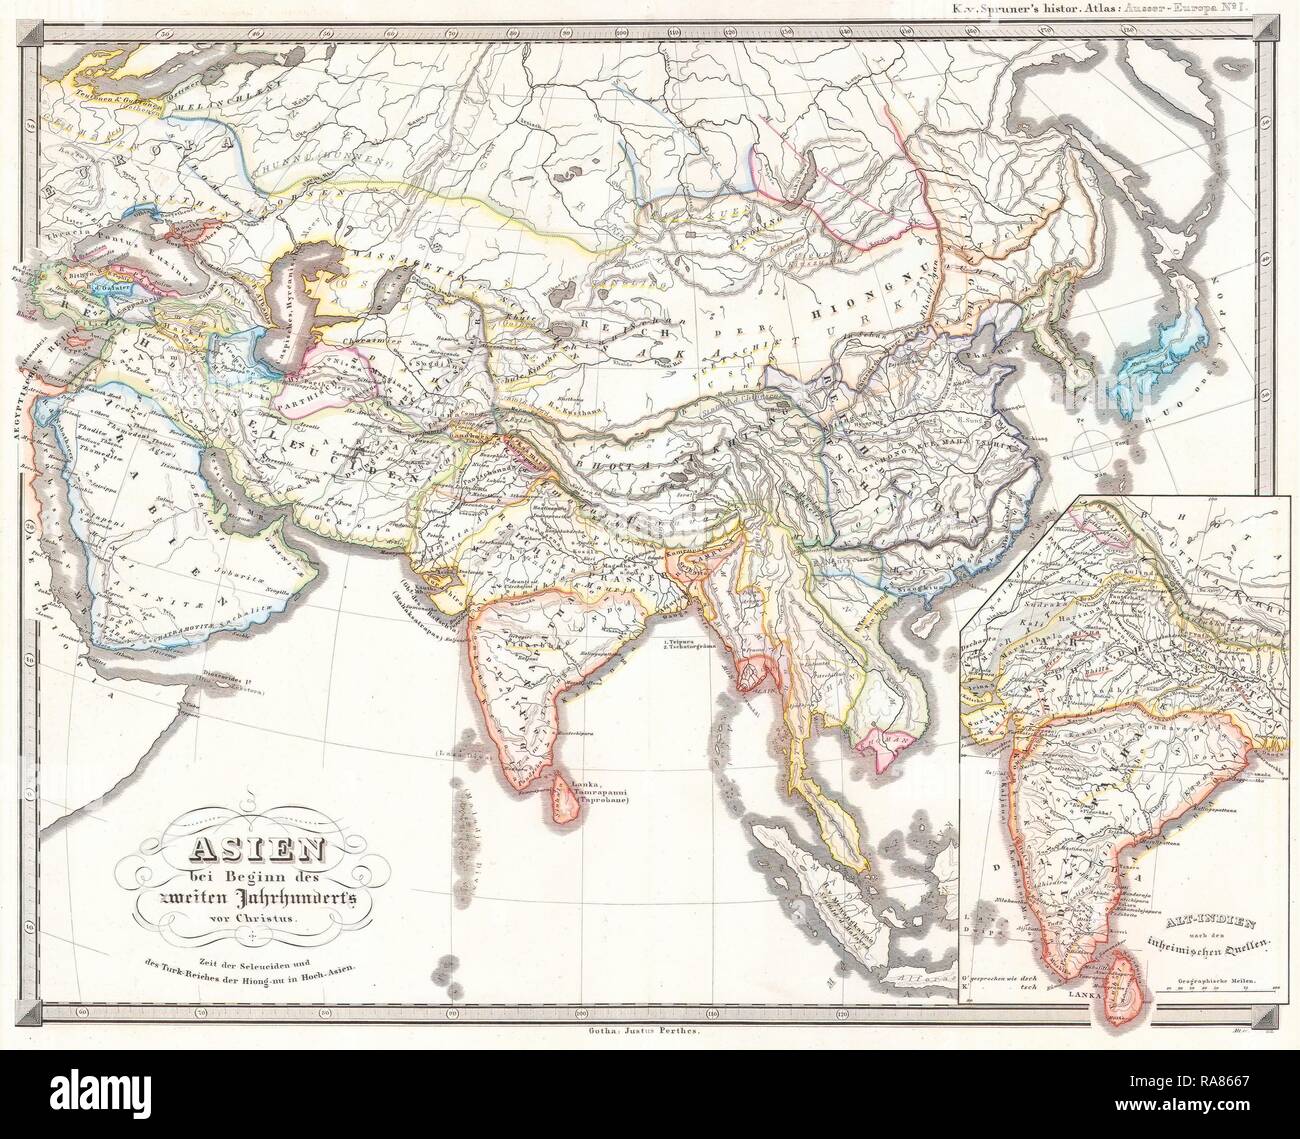 1855, Spruner Map of Asia 200 B.C.E, Han China, Seleucid Empire . Reimagined by Gibon. Classic art with a modern reimagined Stock Photo